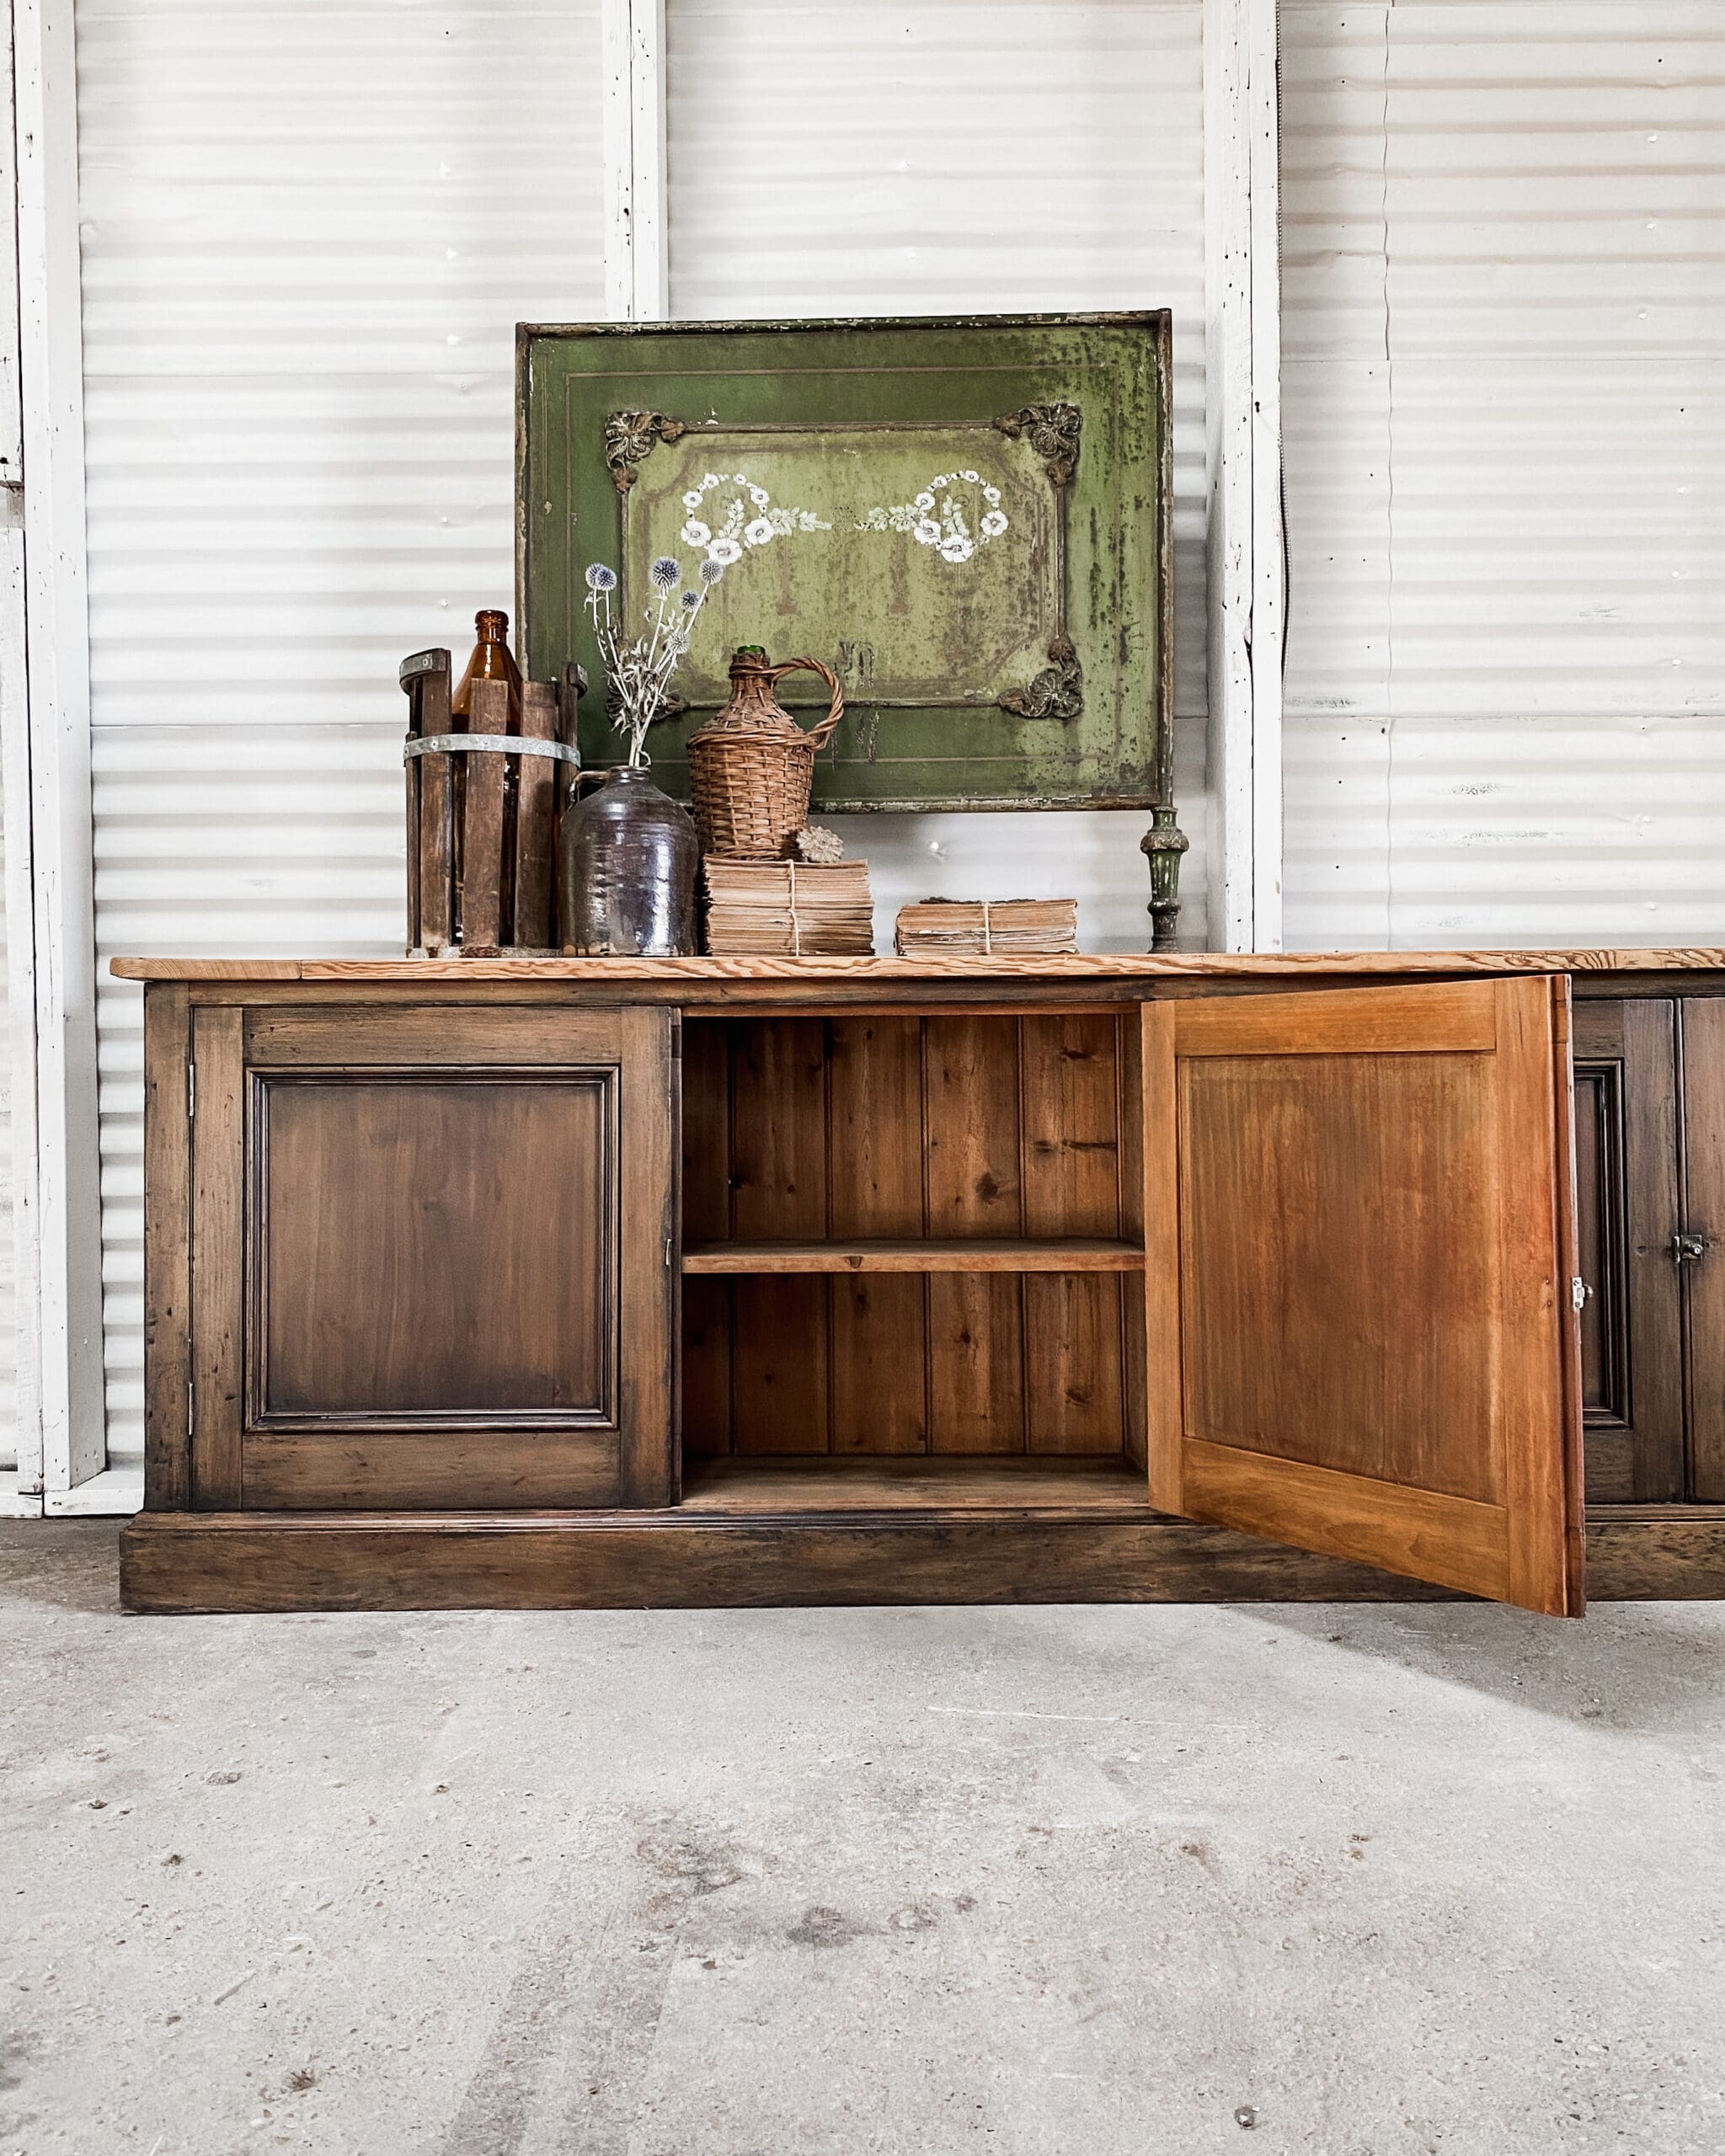 Antique Furniture: 7 Best Ways to Find and Save on Vintage